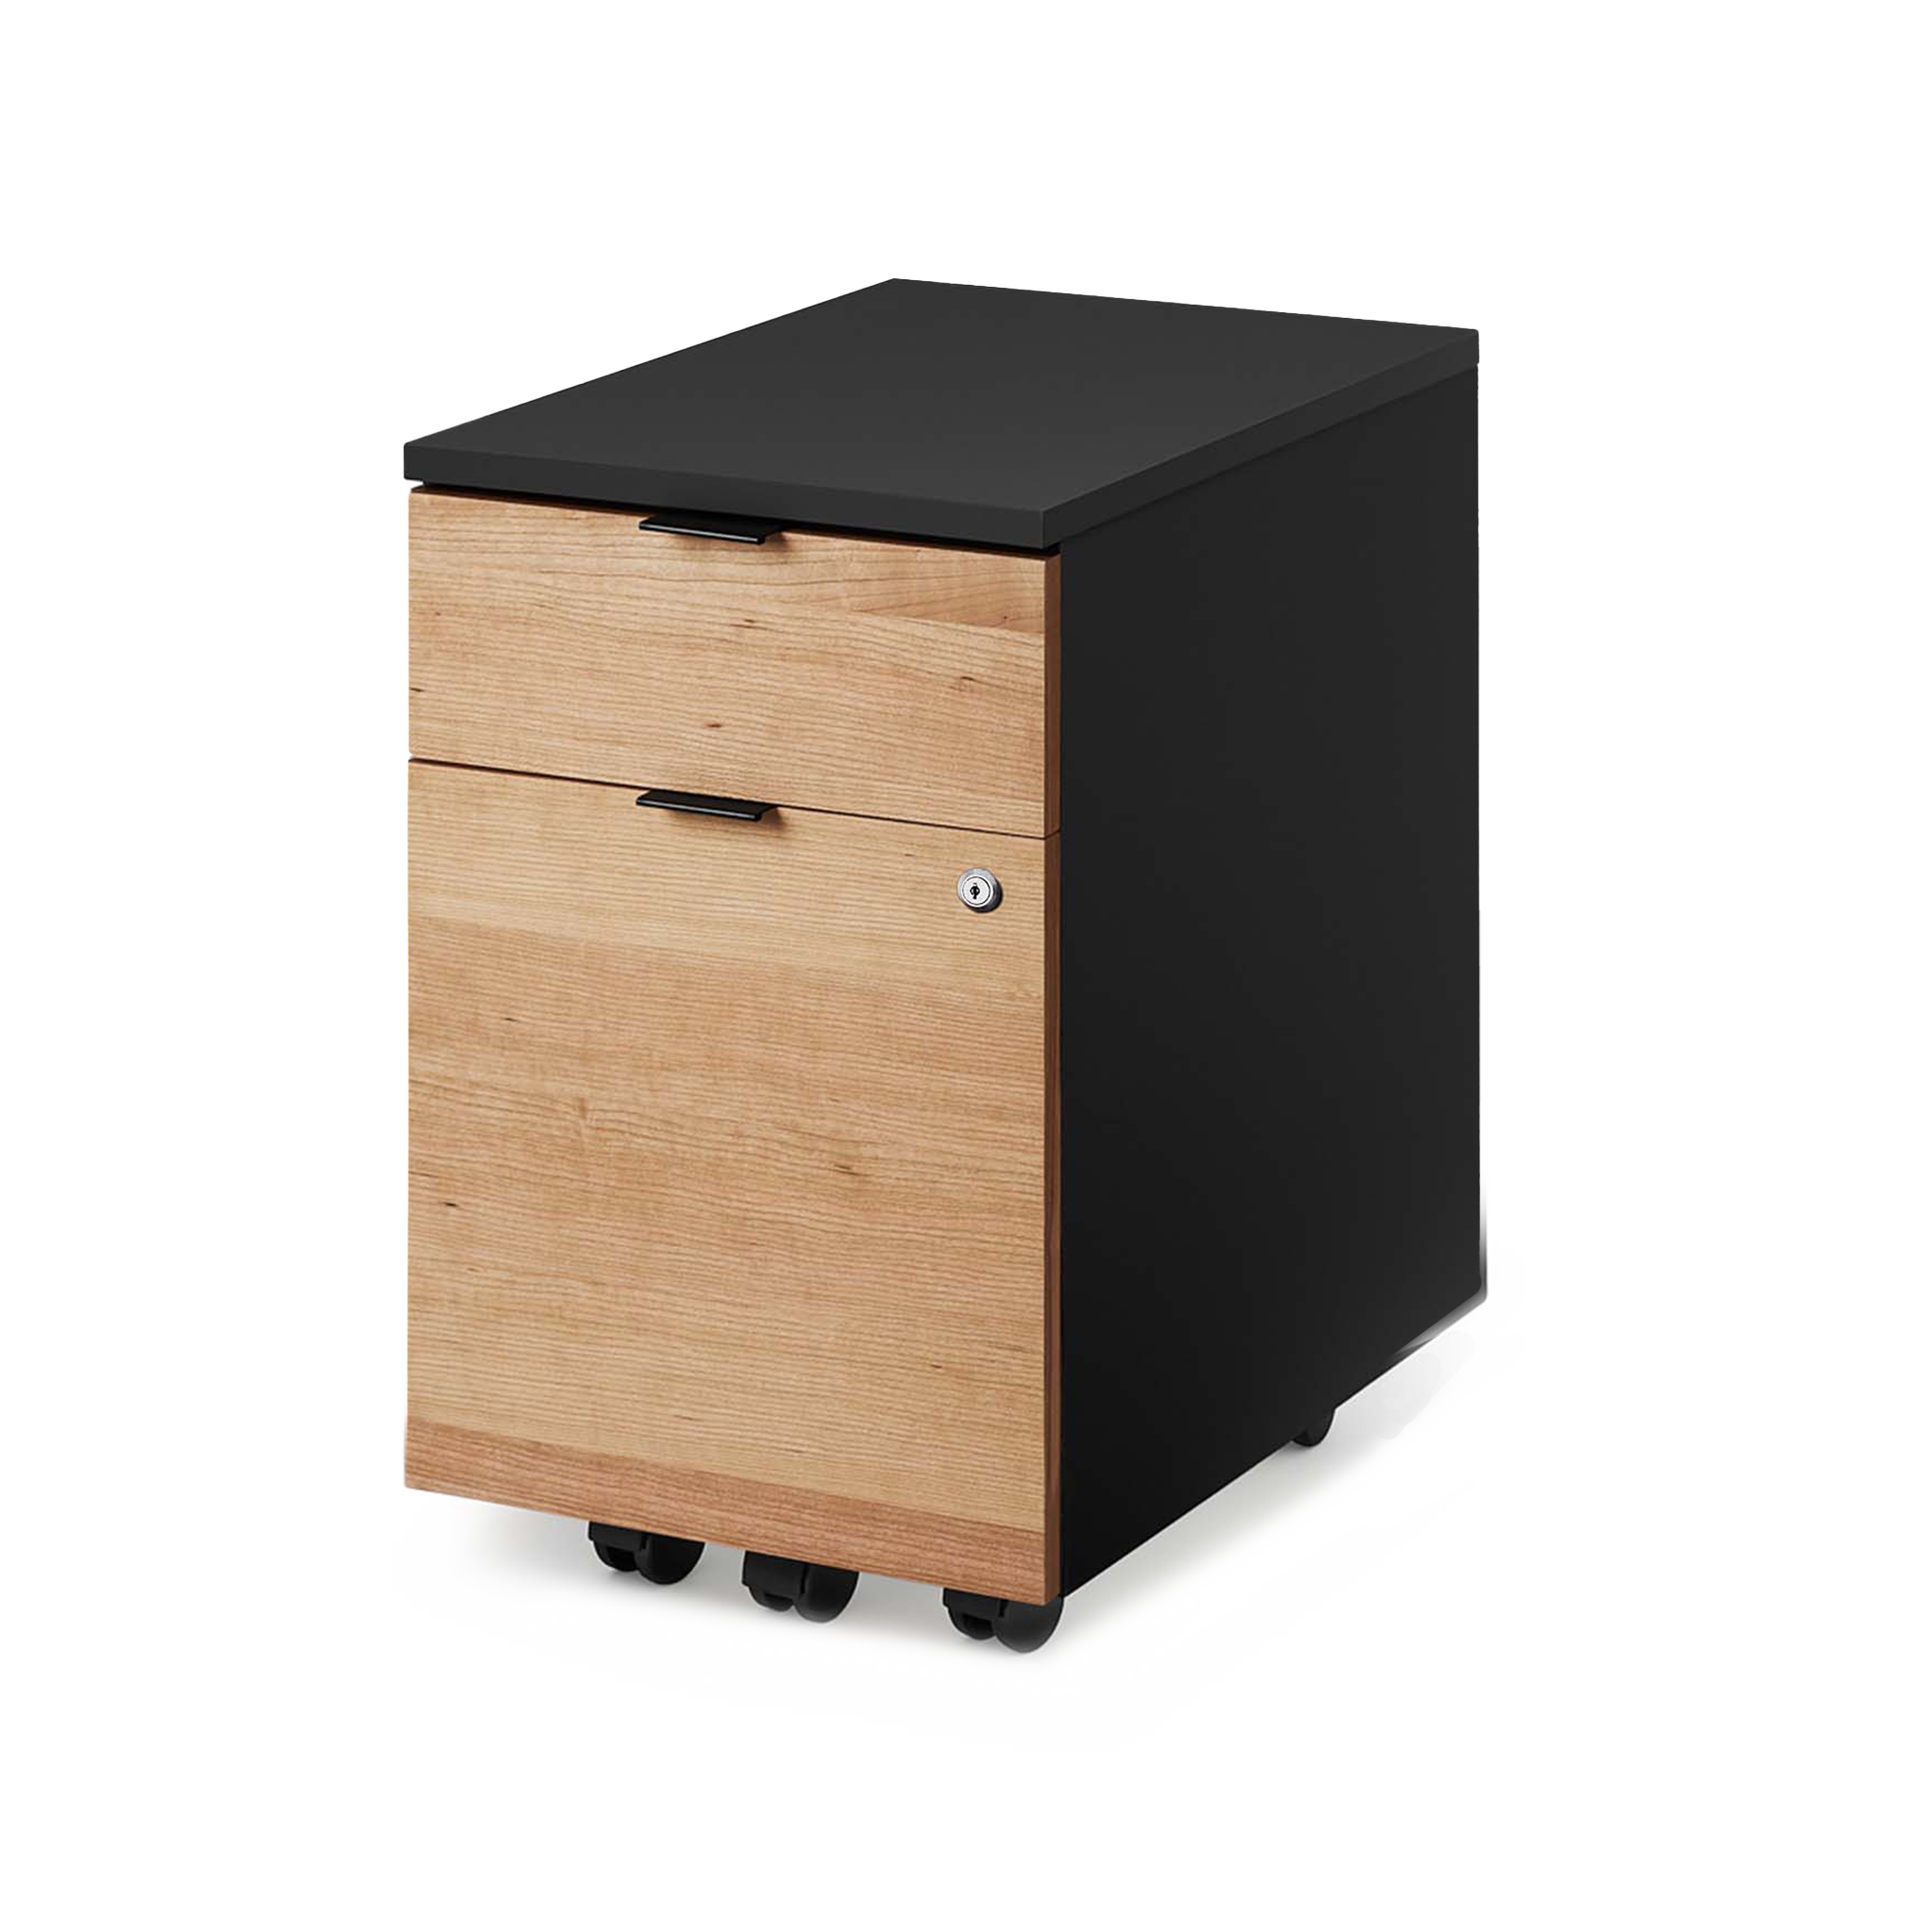 Almost Perfect Neat Filing Cabinet - Black-Cherrywood - Noir-Cerisier